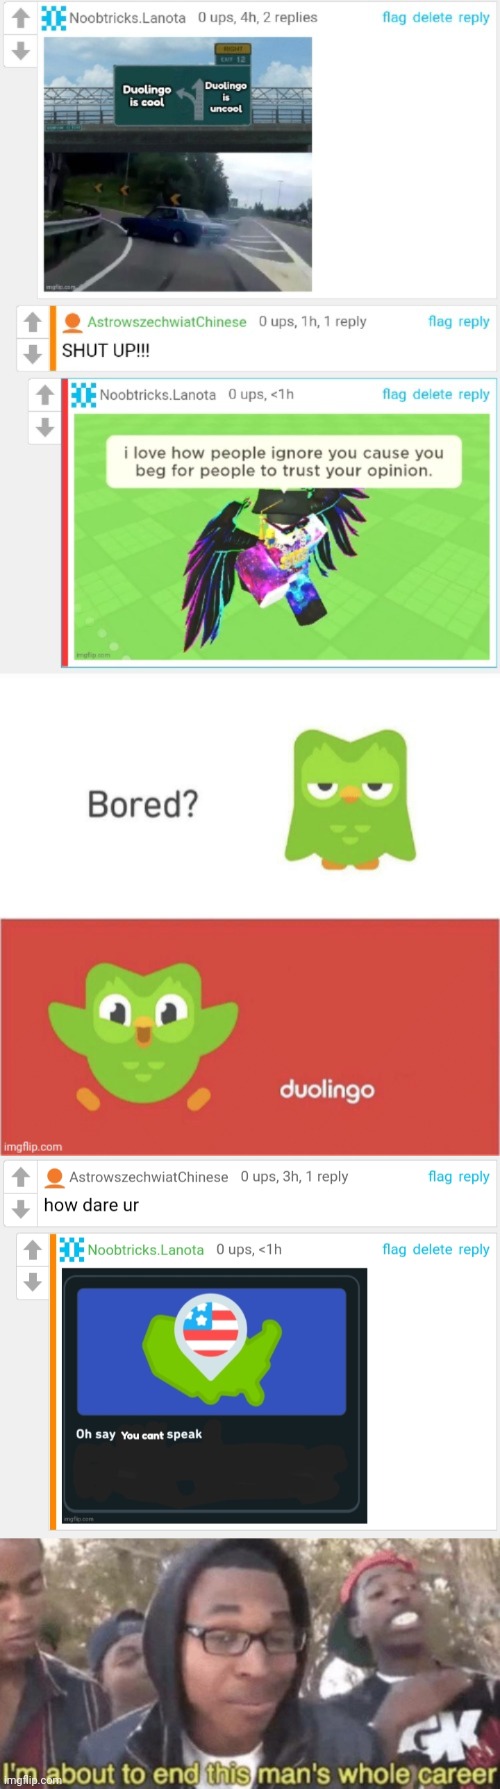 Never mess with duolingo! (Part 2) | image tagged in i am about to end this man s whole career,duolingo,repost,get rekt,memes,bored duolingo | made w/ Imgflip meme maker